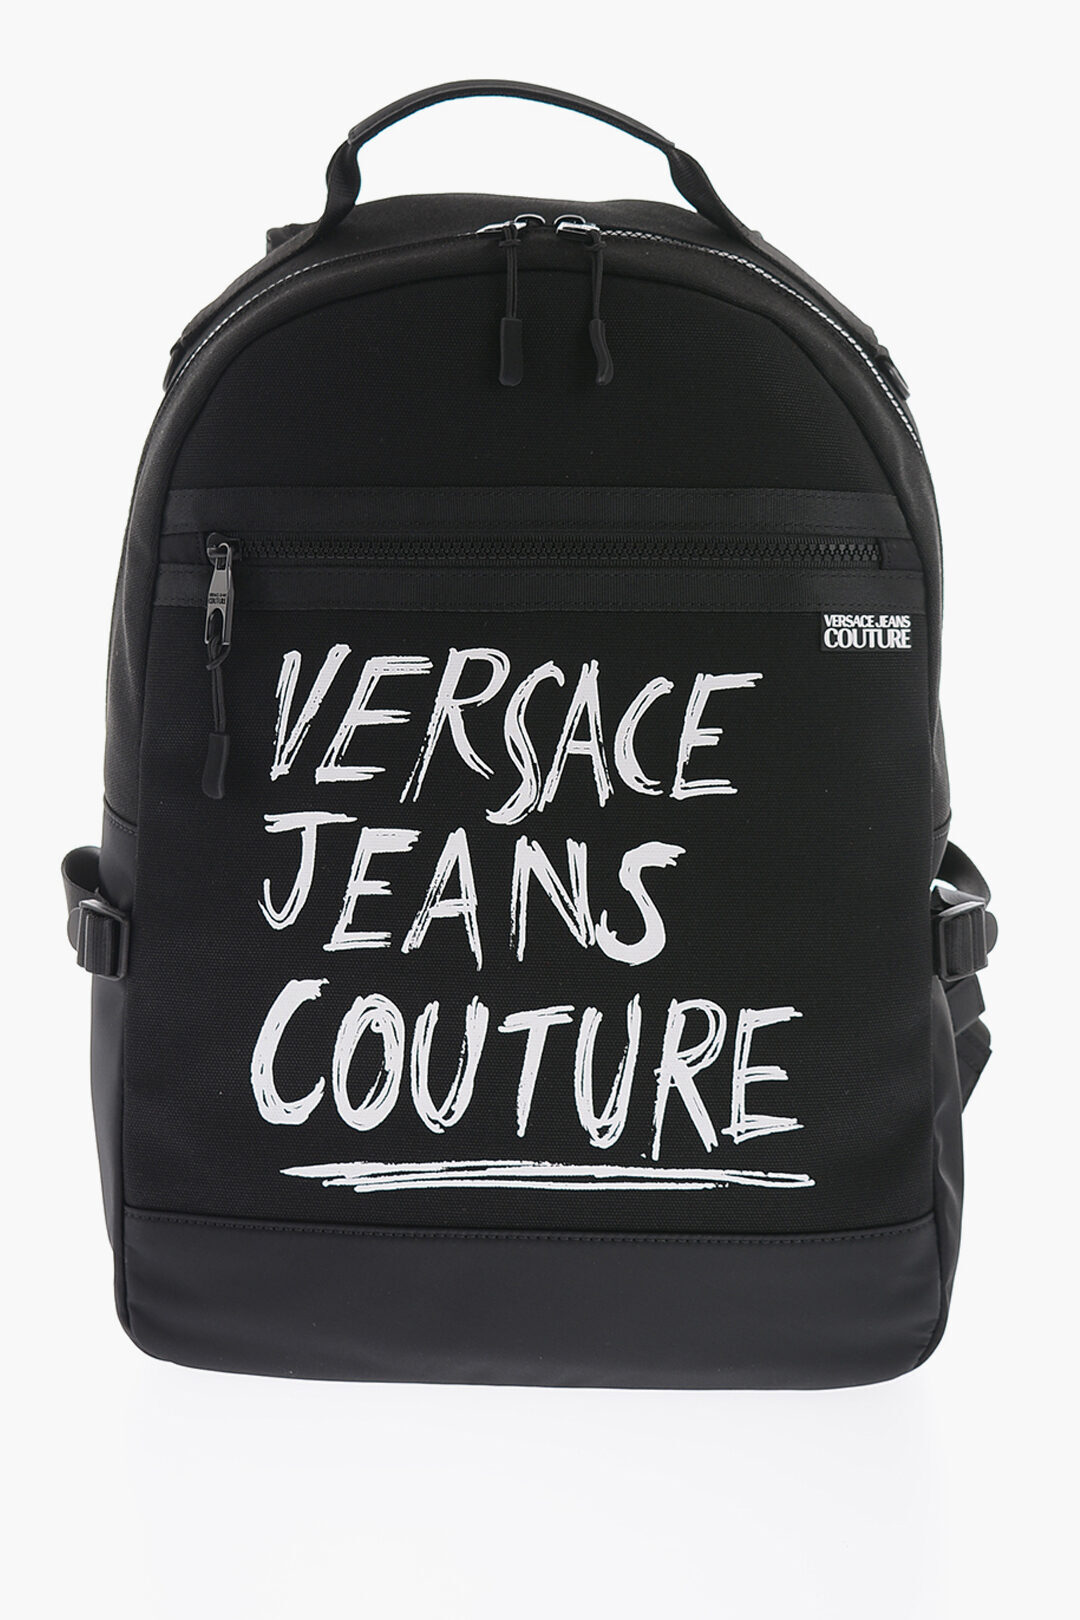  VERSACE ヴェルサーチ バックパック 74YA4B50 ZS577 899 メンズ JEANS COUTURE CANVAS BACKPACK WITH PRINTED CONTRASTING LOGO  dk